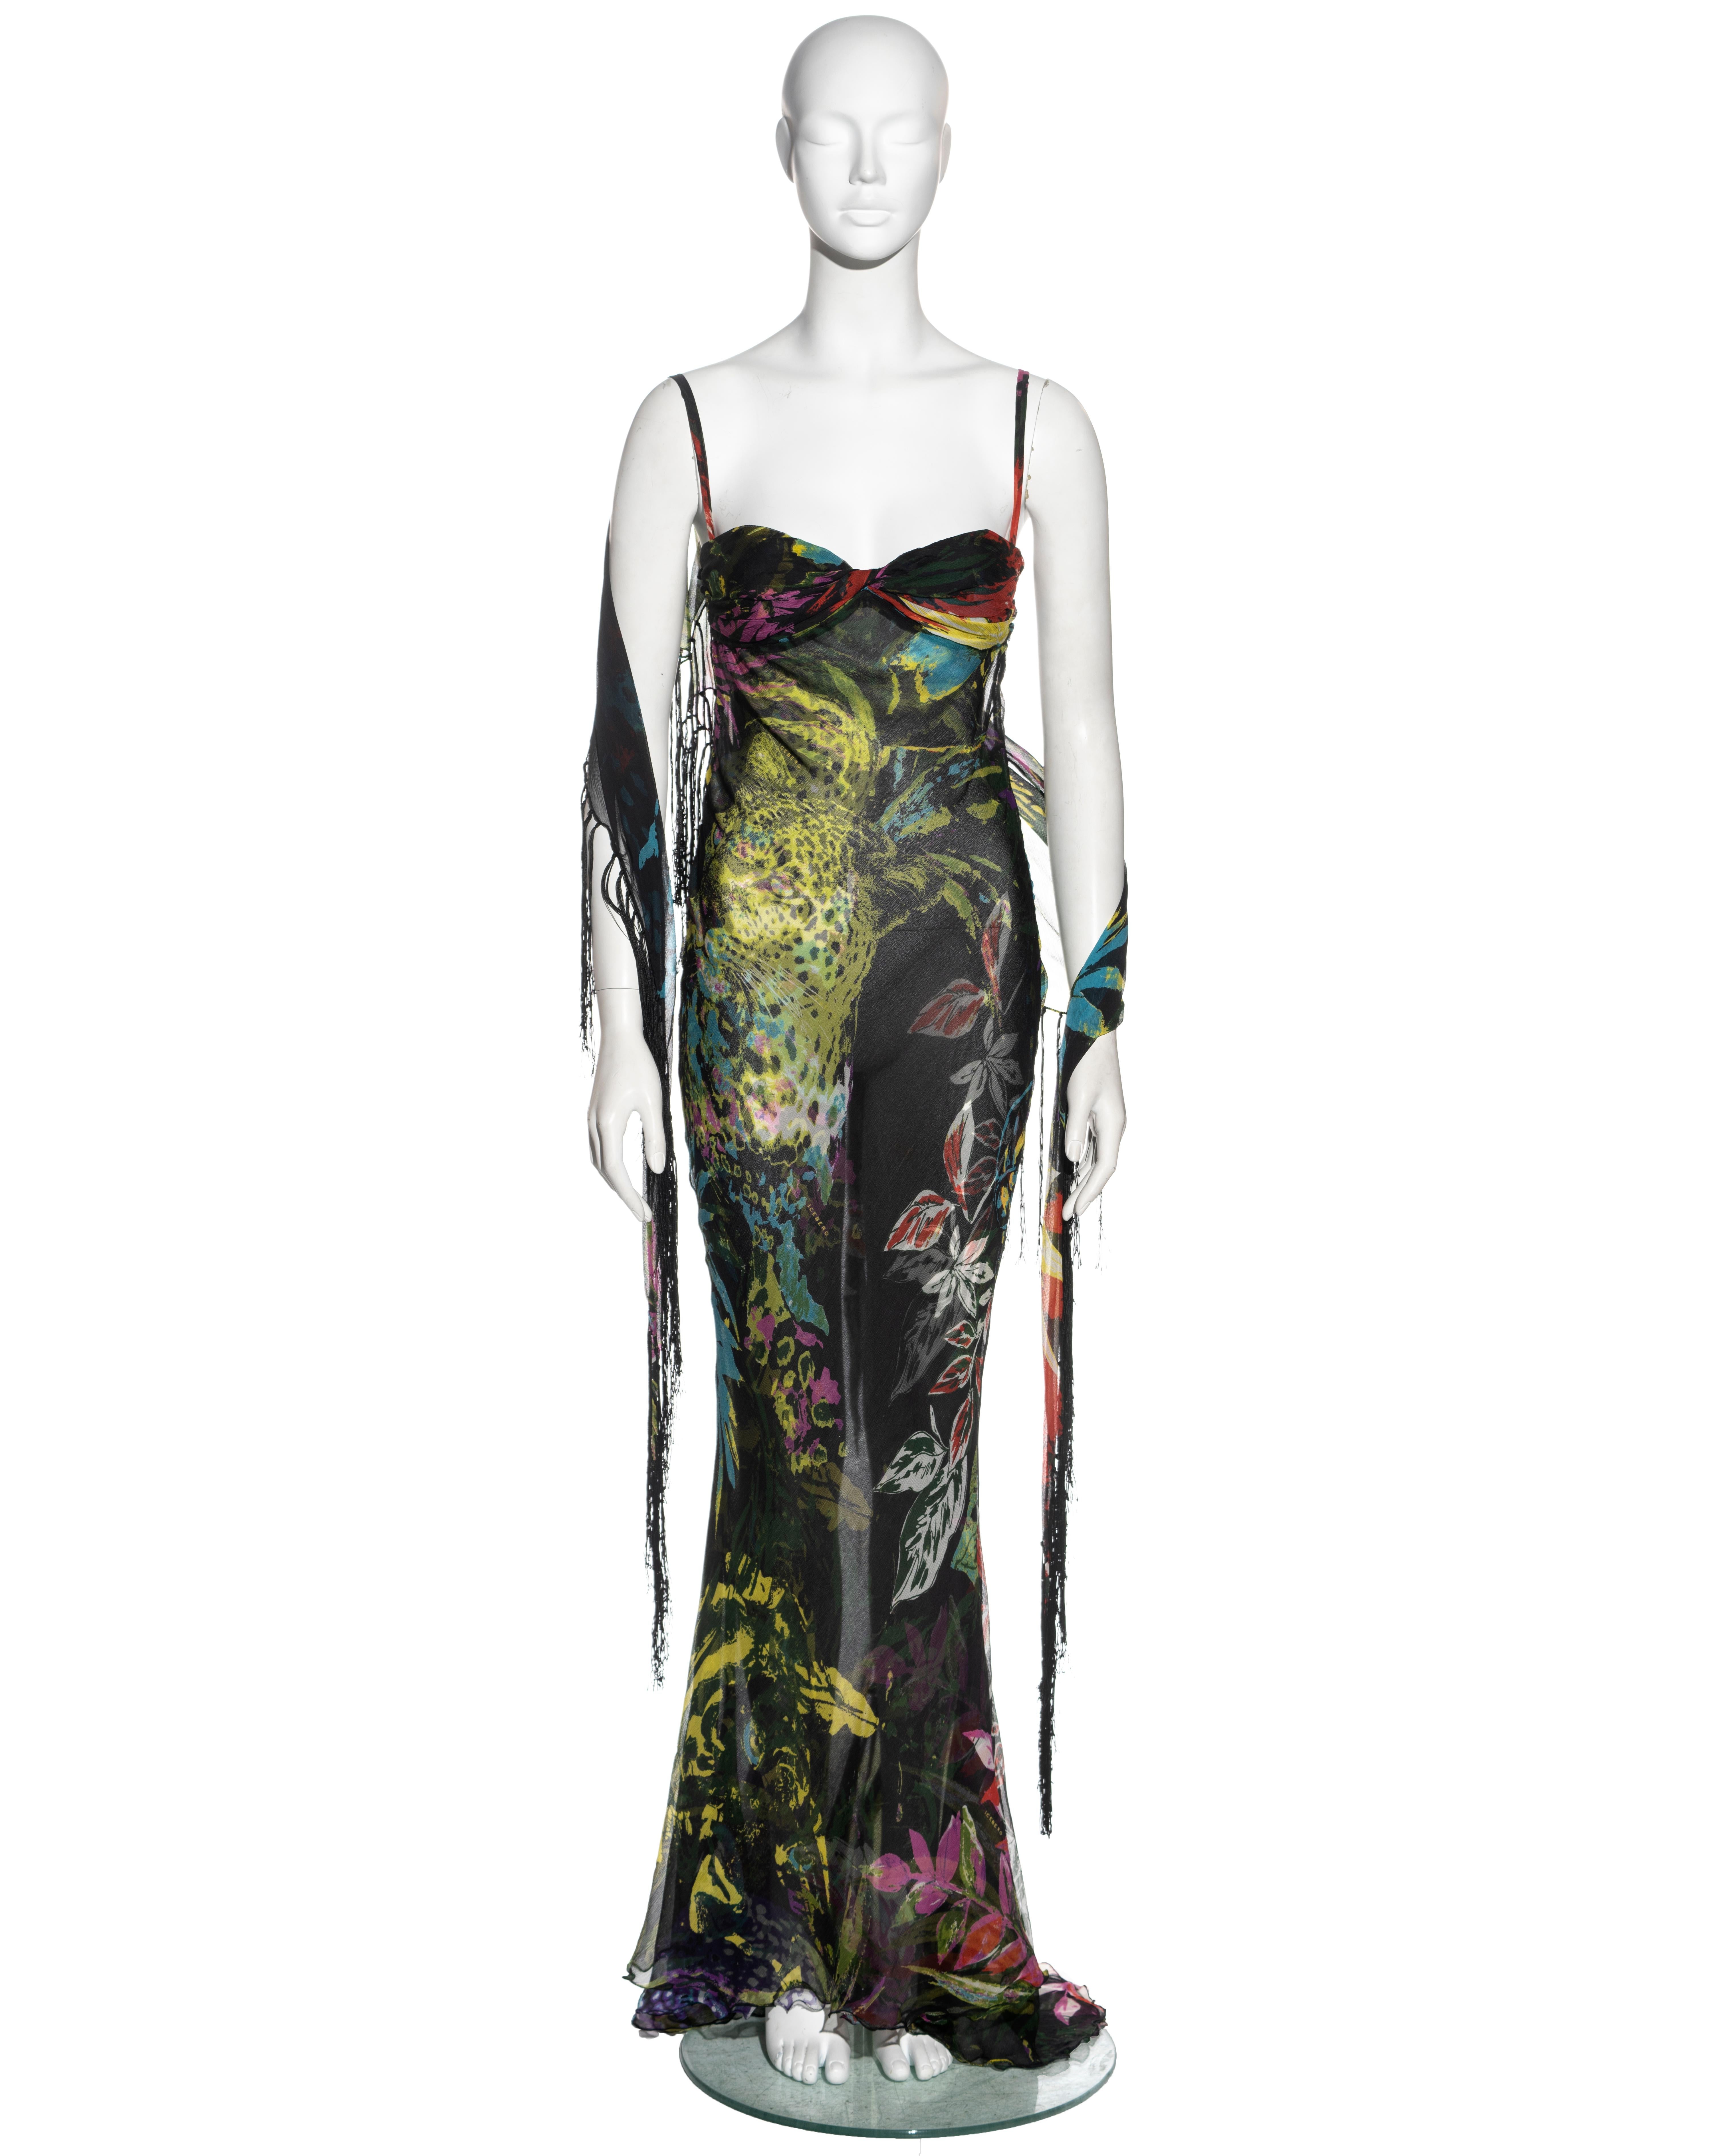 ▪ Iceberg maxi dress
▪ Sold by One of a Kind Archive
▪ Constructed from bias-cut silk chiffon with multicoloured jungle print
▪ Built-in bra with adjustable shoulder straps 
▪ Open low back 
▪ Long ties fasten with a knot at the back 
▪ Matching